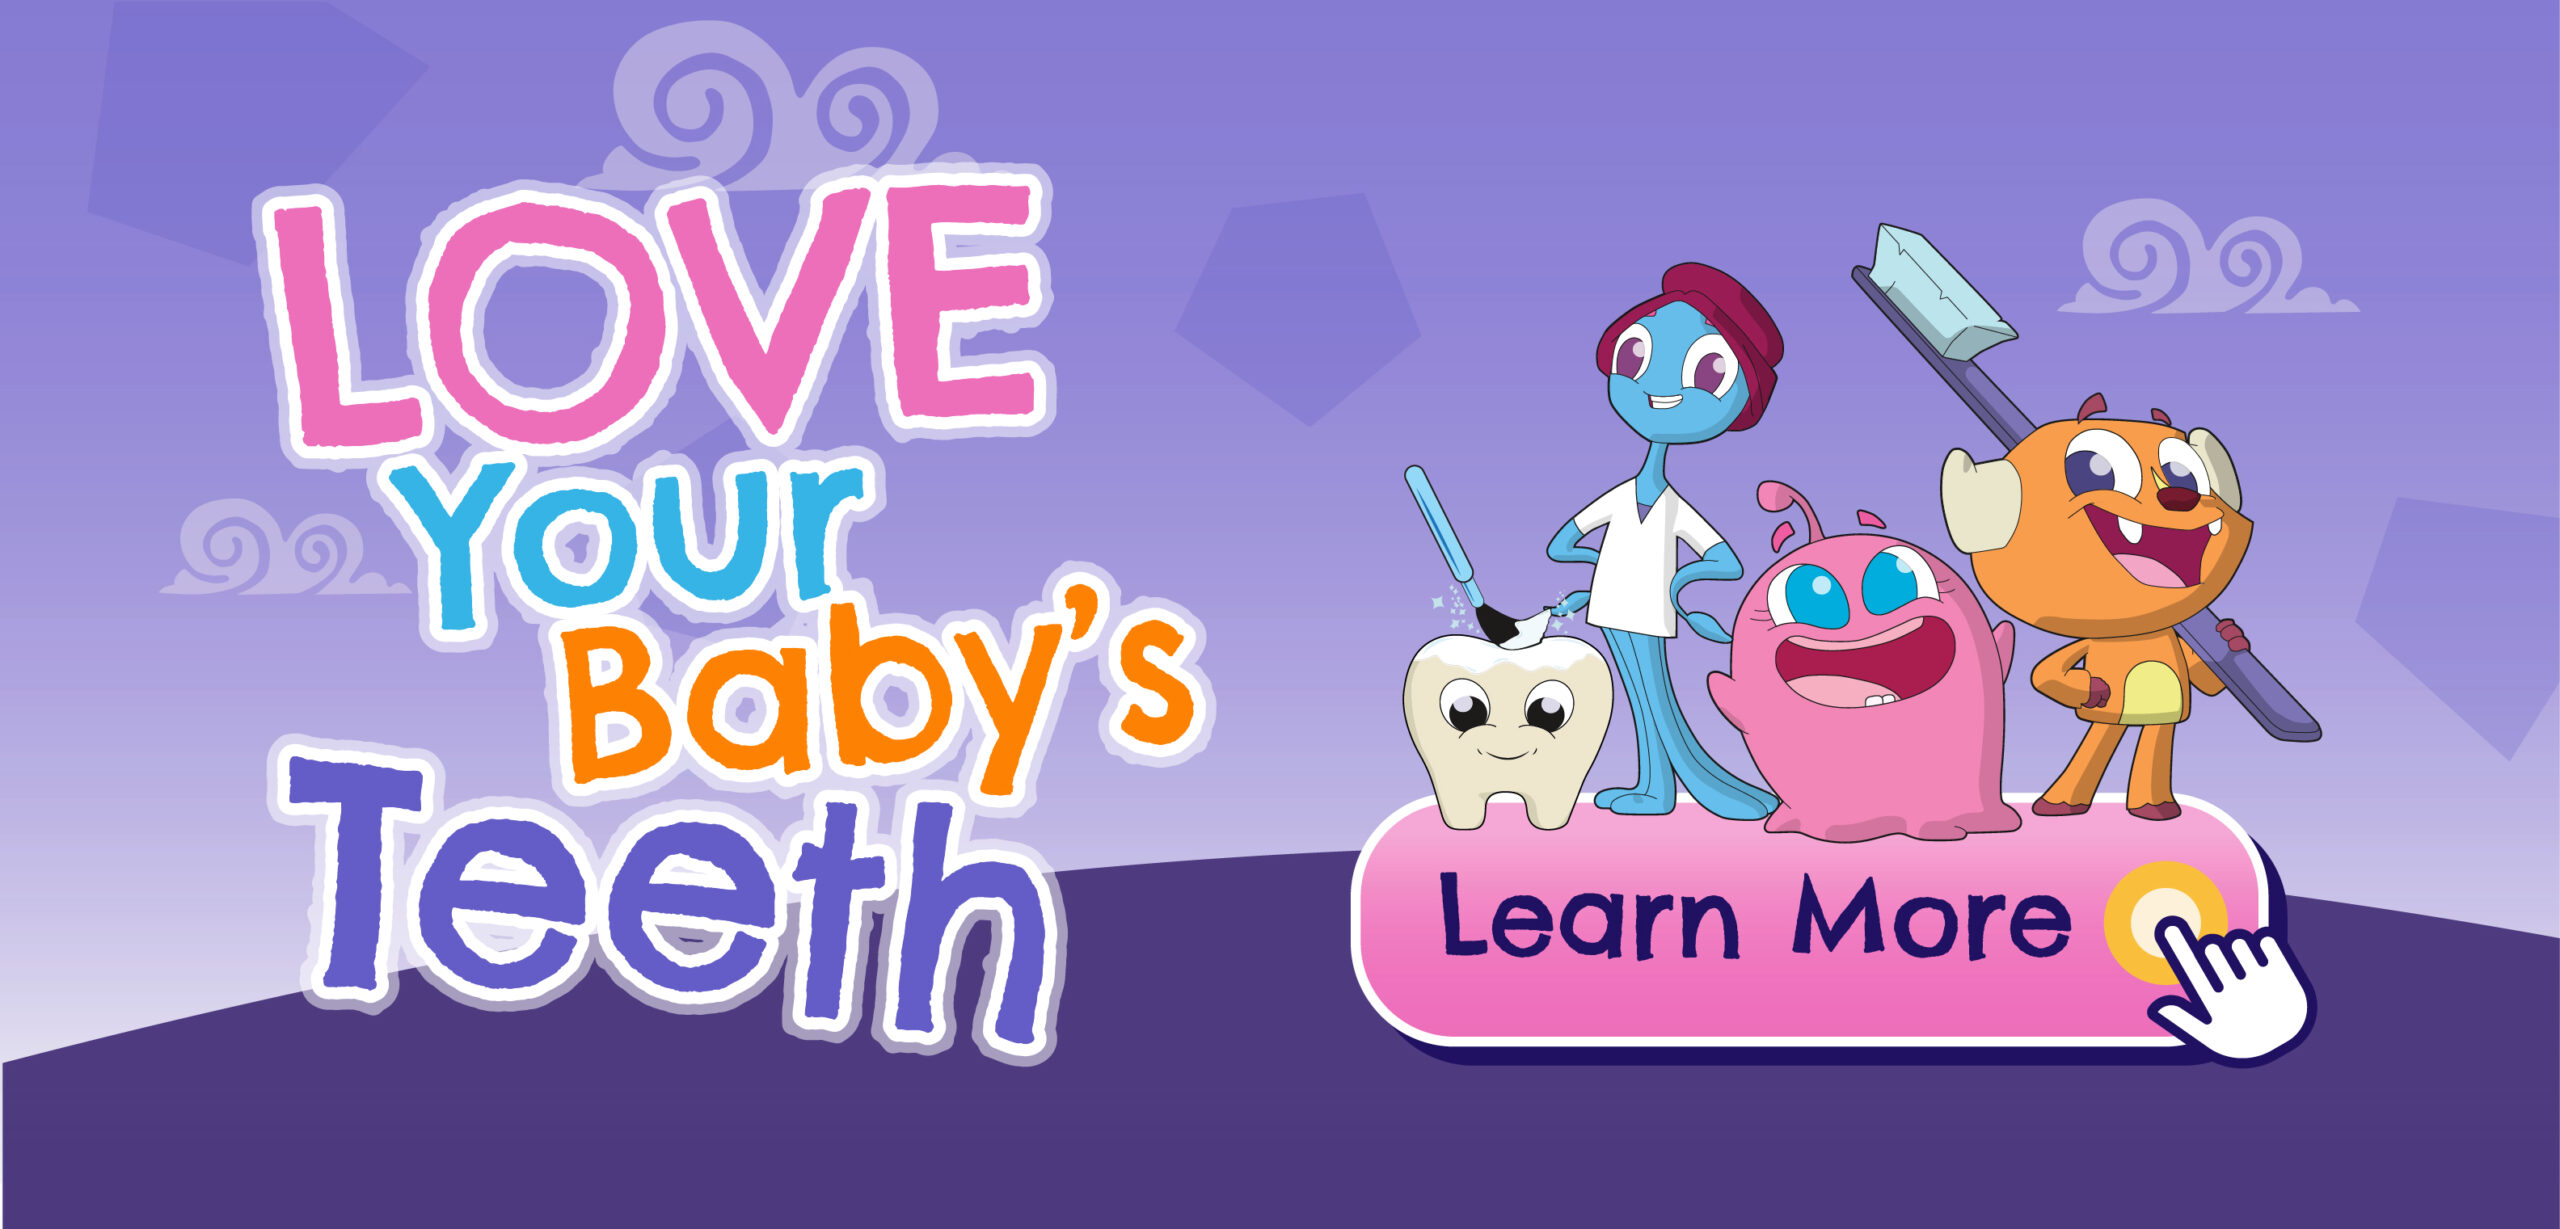 Love Your Baby's Teeth. Click to learn More. Illustration of 4 playful Mouth Monsters pose showing off their dental care activities including getting sealants and using a toothbrush.